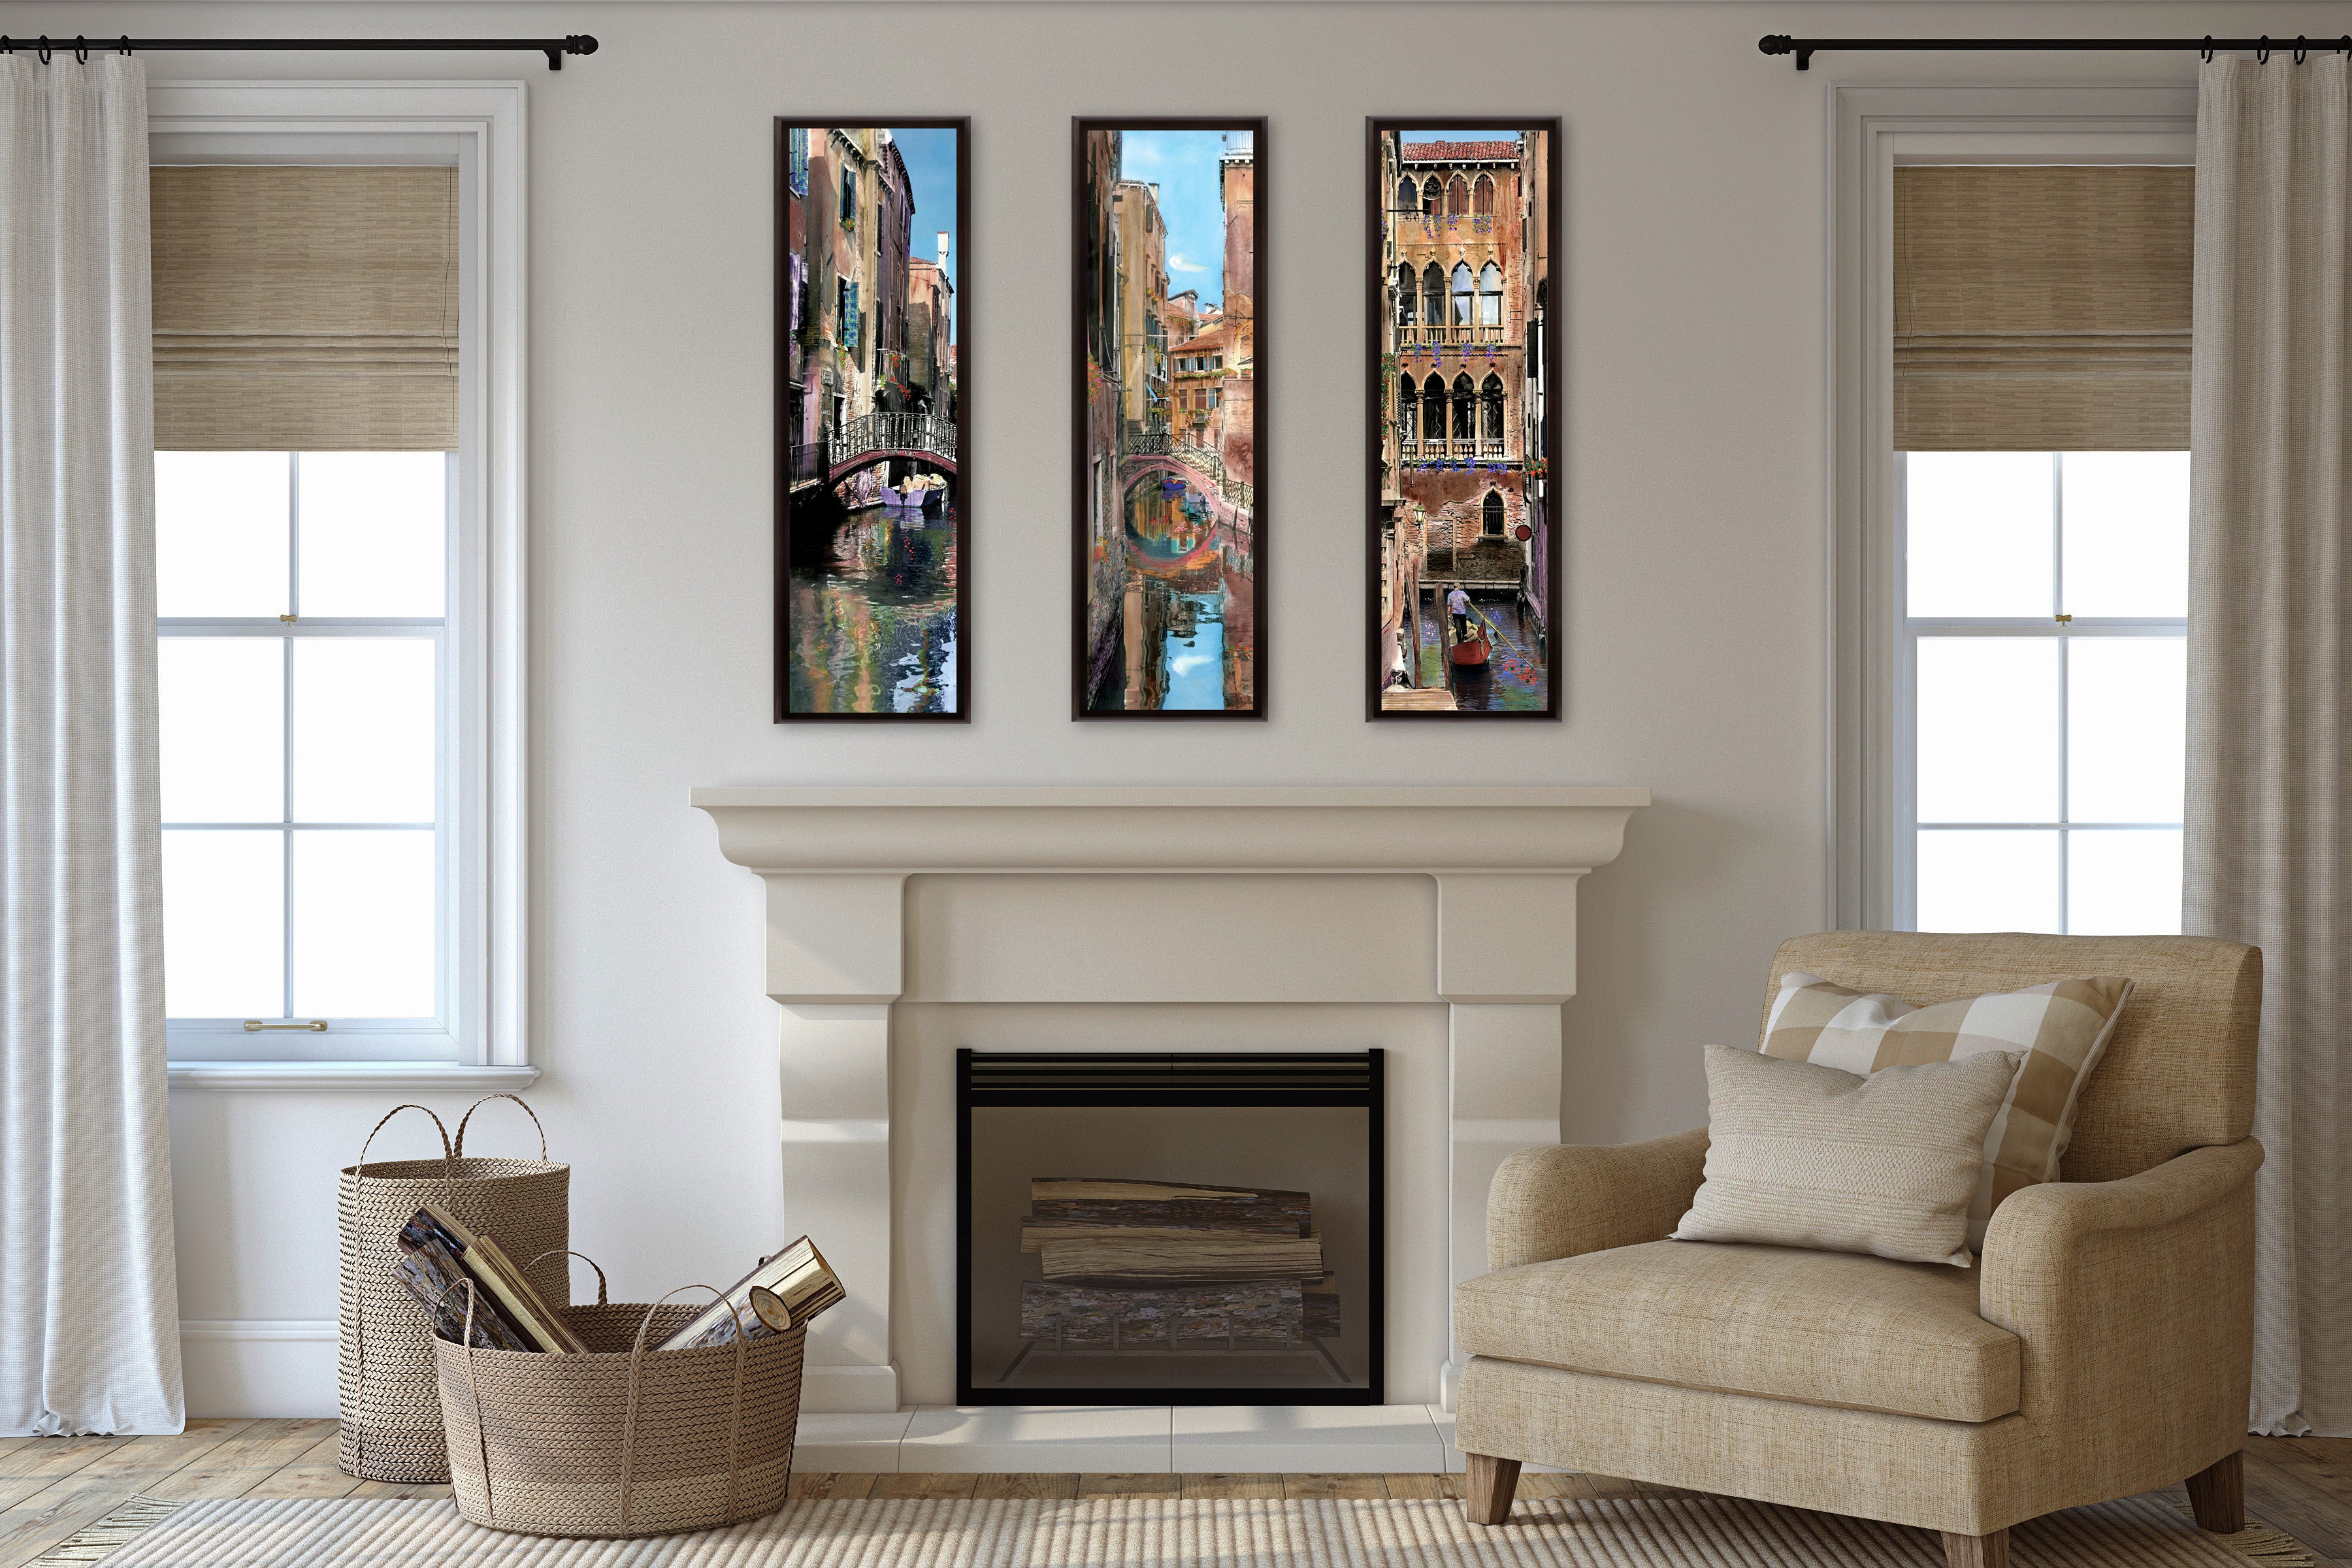 "Textured Canal" TALL SKINNY CANVAS FRAMED PRINT "15 X 45"